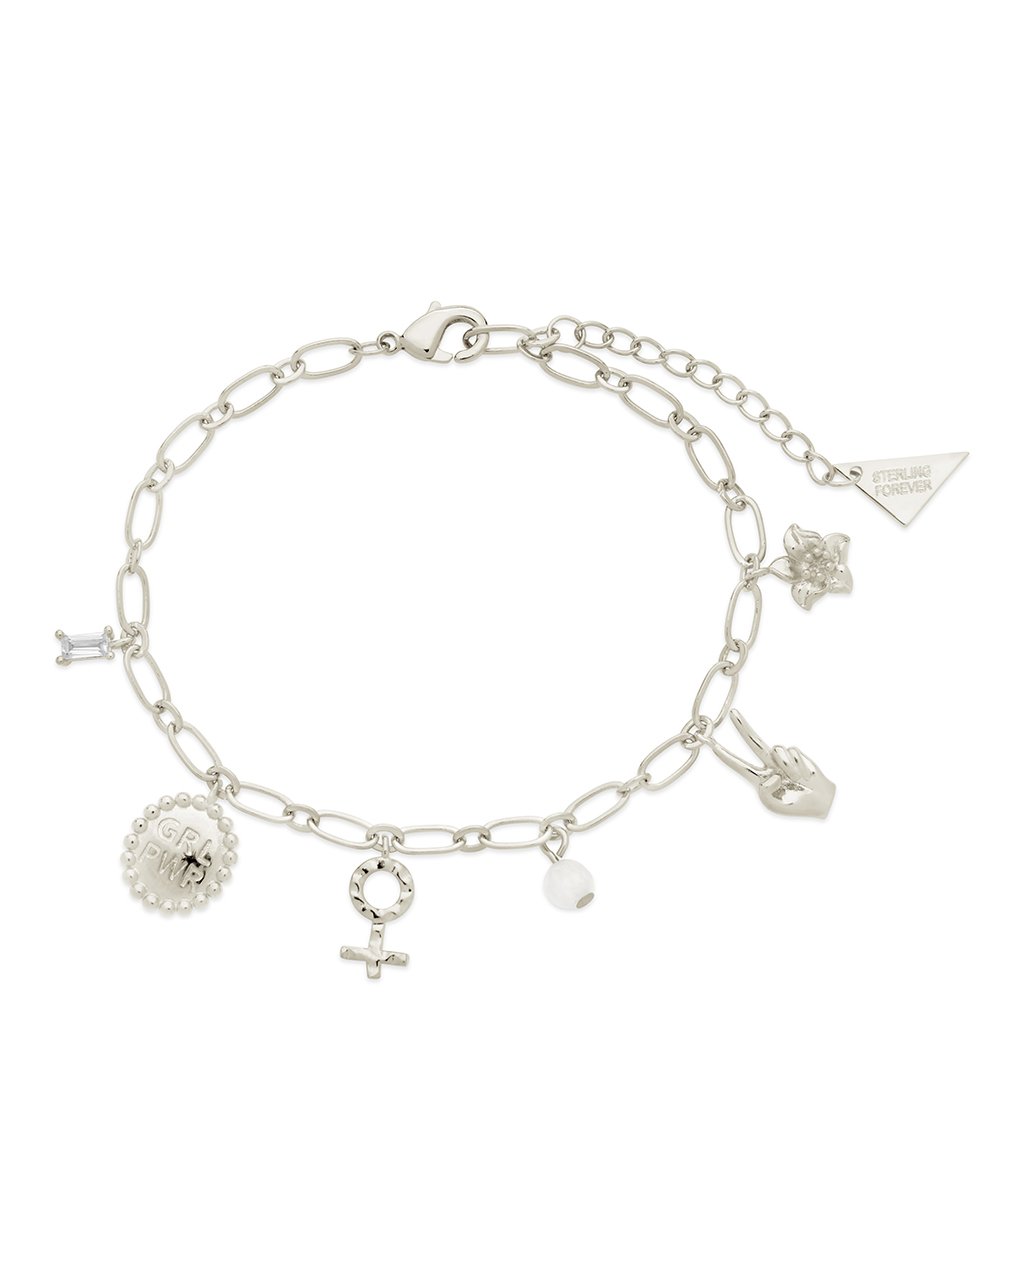 Silvostyle Links of Life 92.5 Sterling Silver Charm Bracelet for Women :  : Fashion